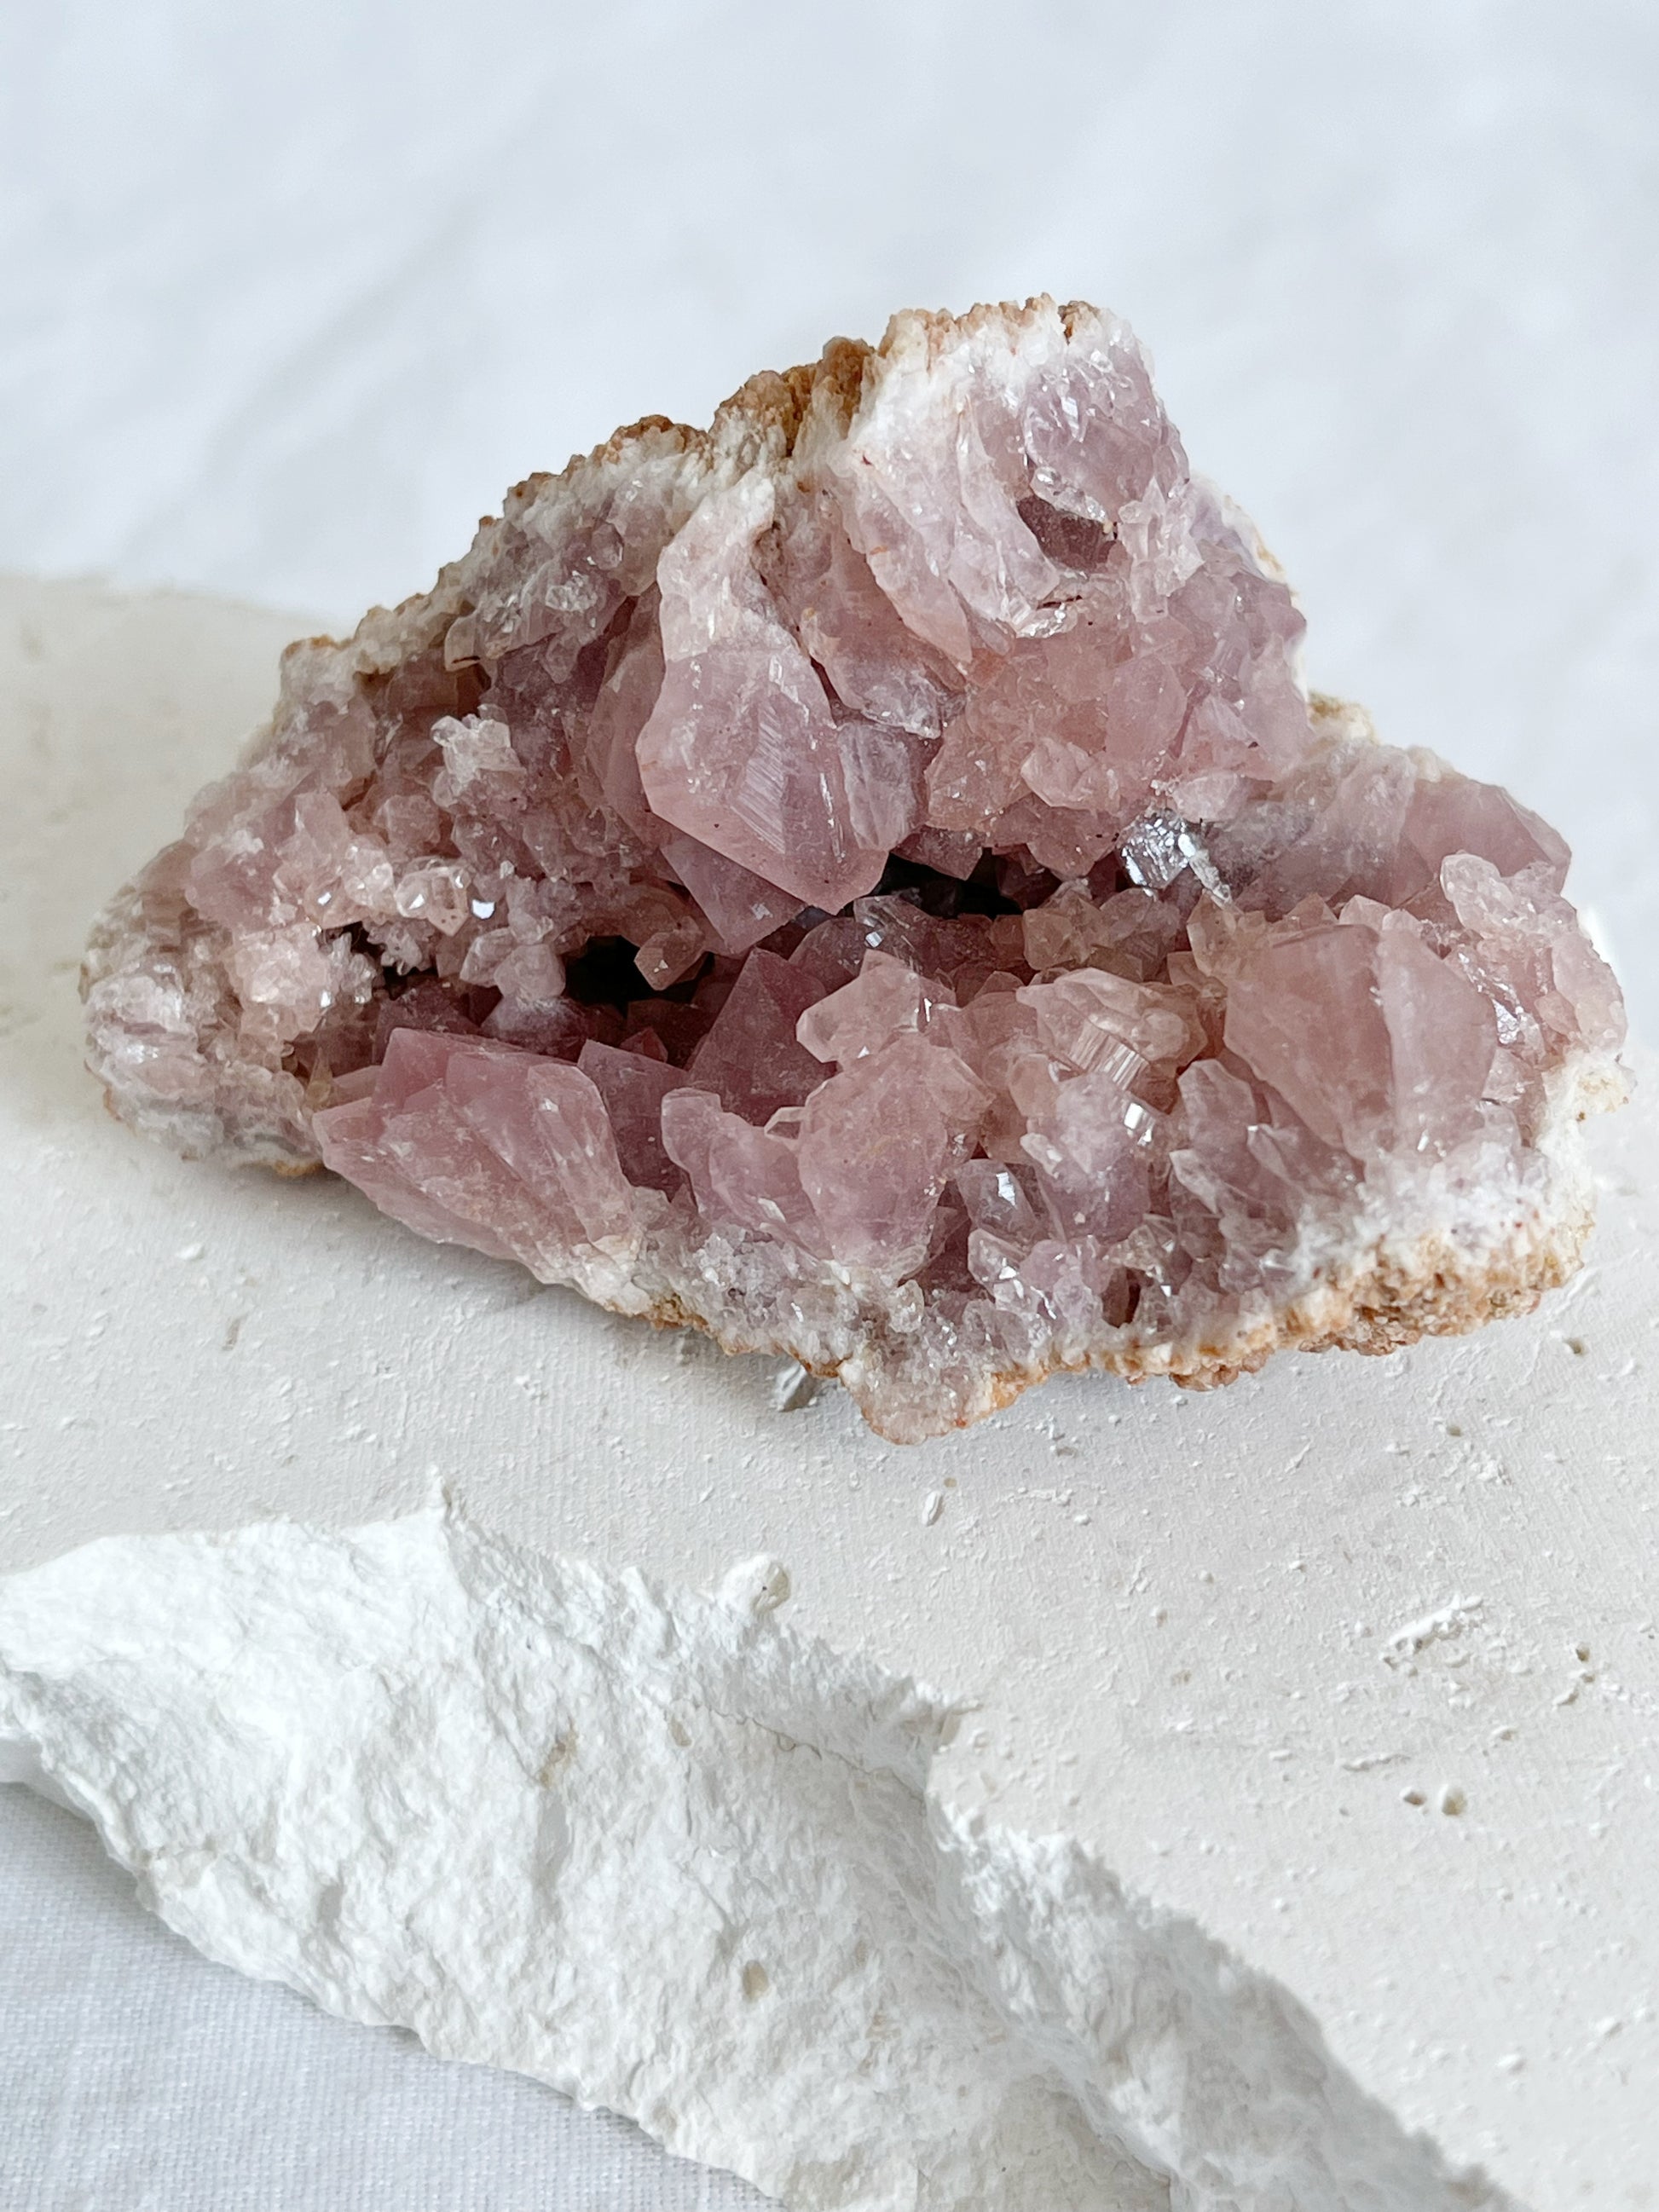 PINK AMETHYST, GEODE, STONED AND SAGED AUSTRALIA